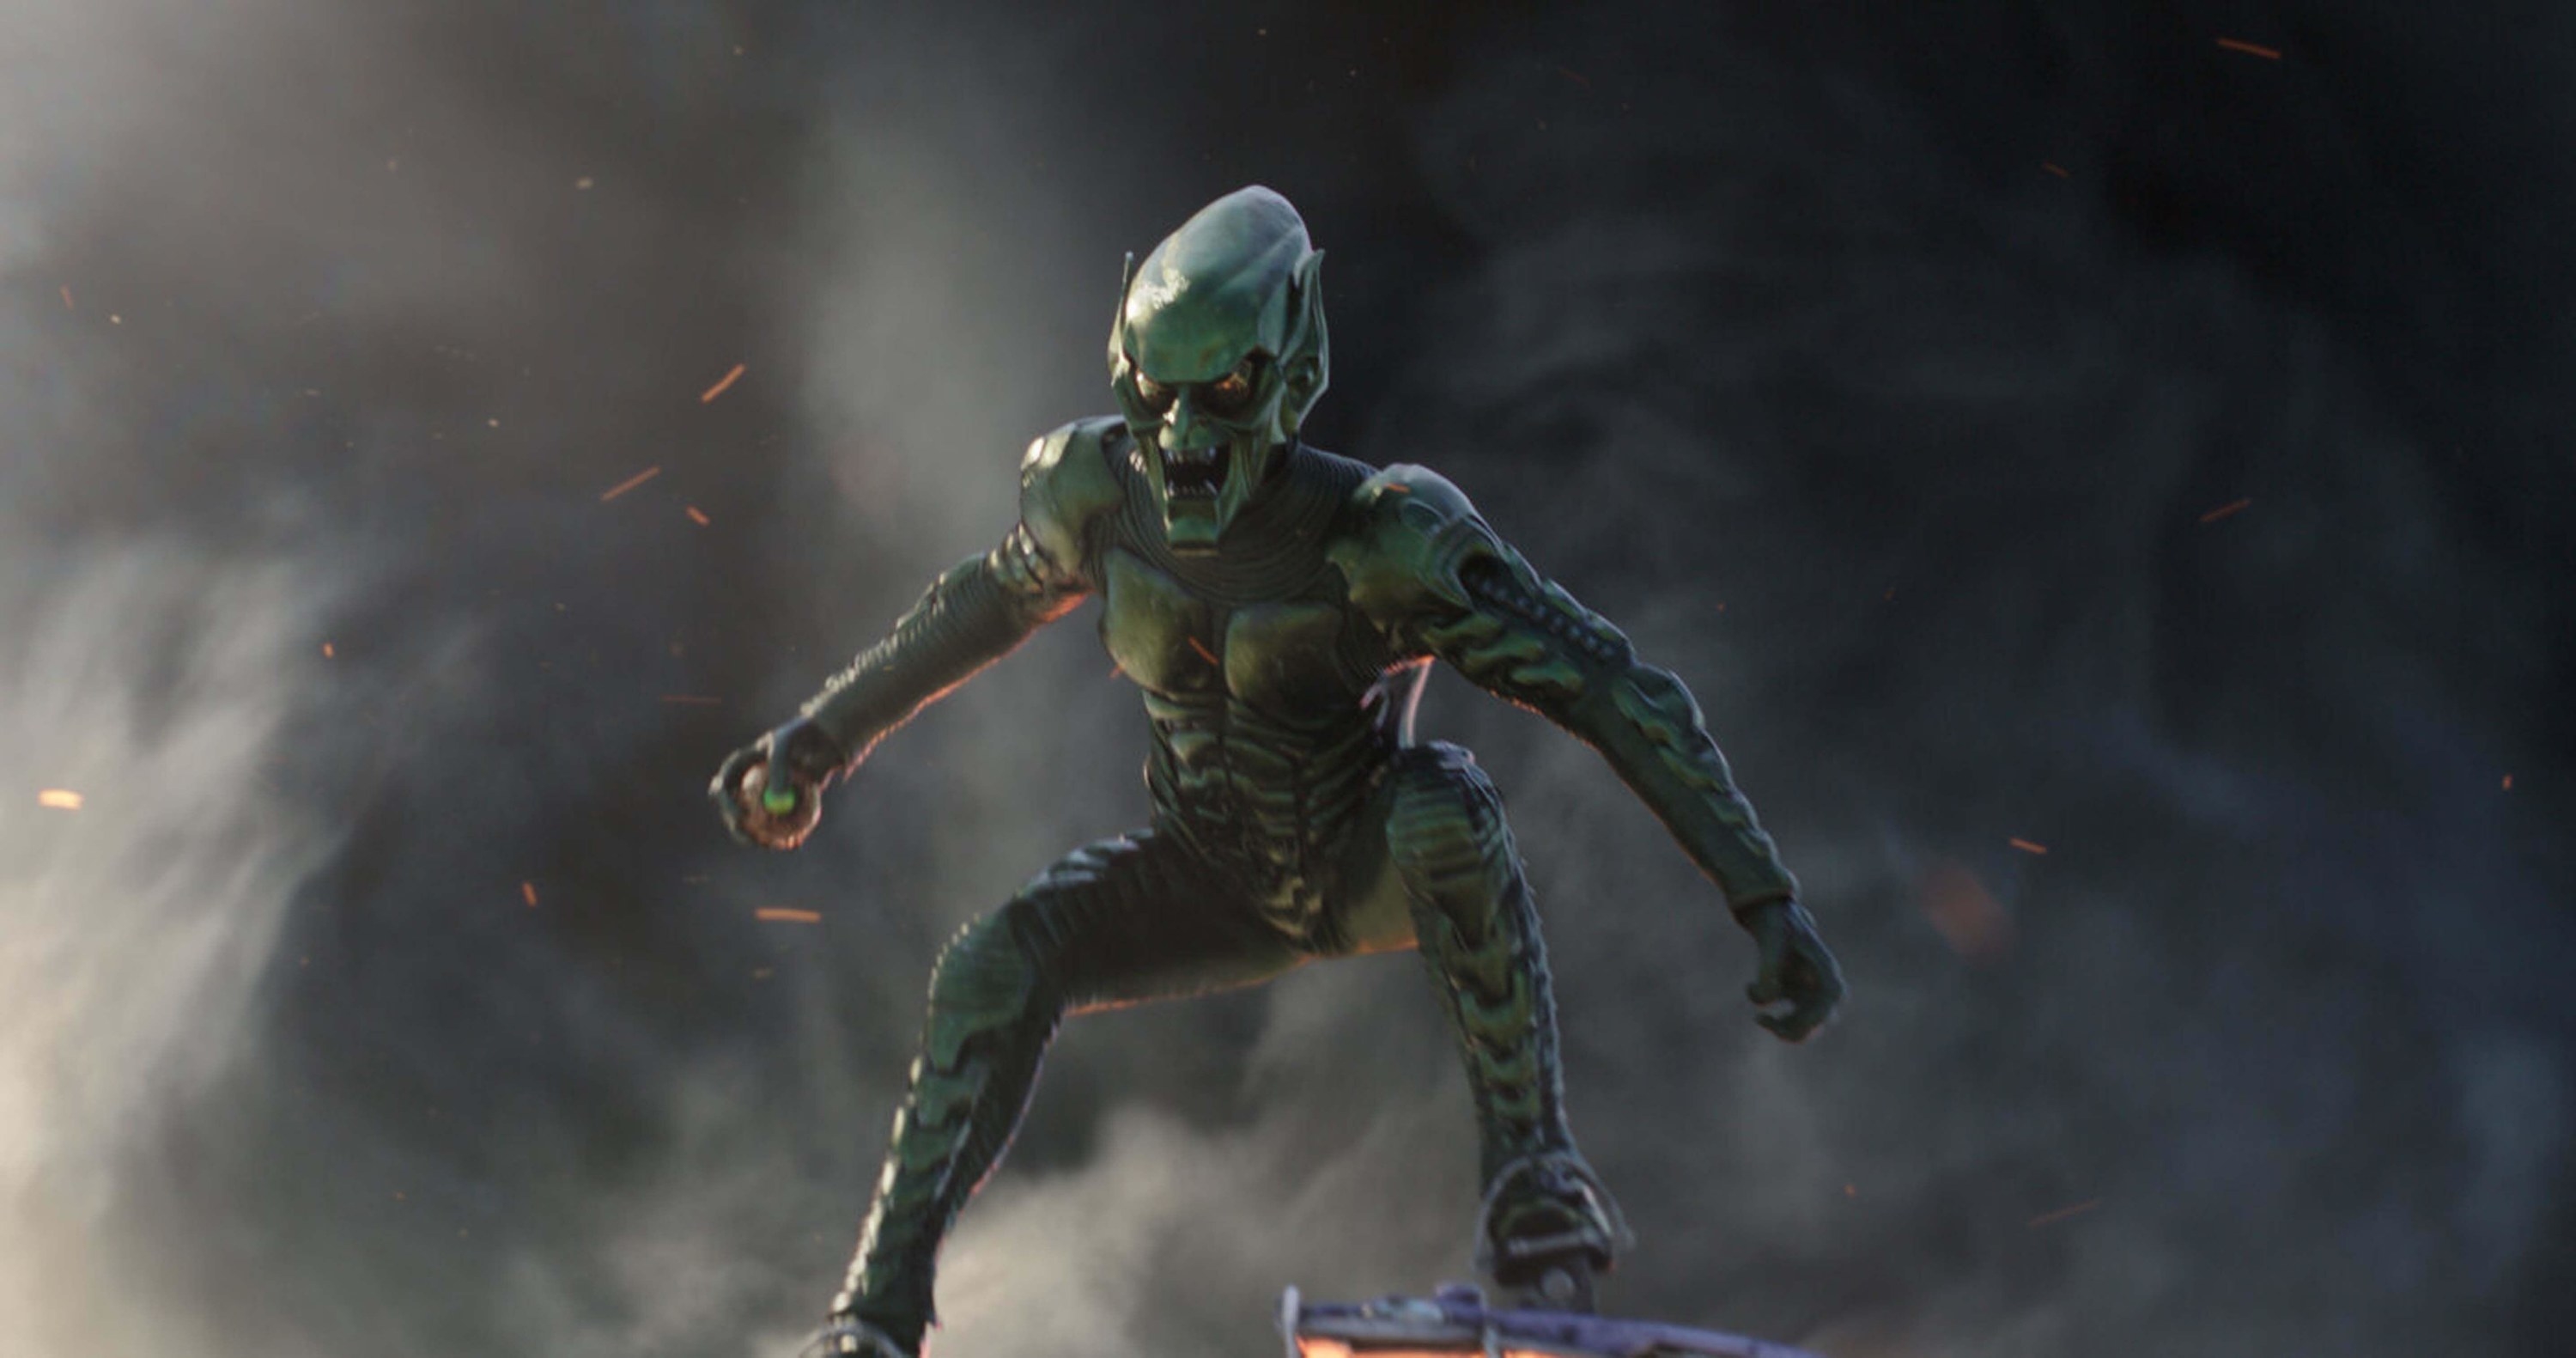 The Green Goblin appears in the MCU